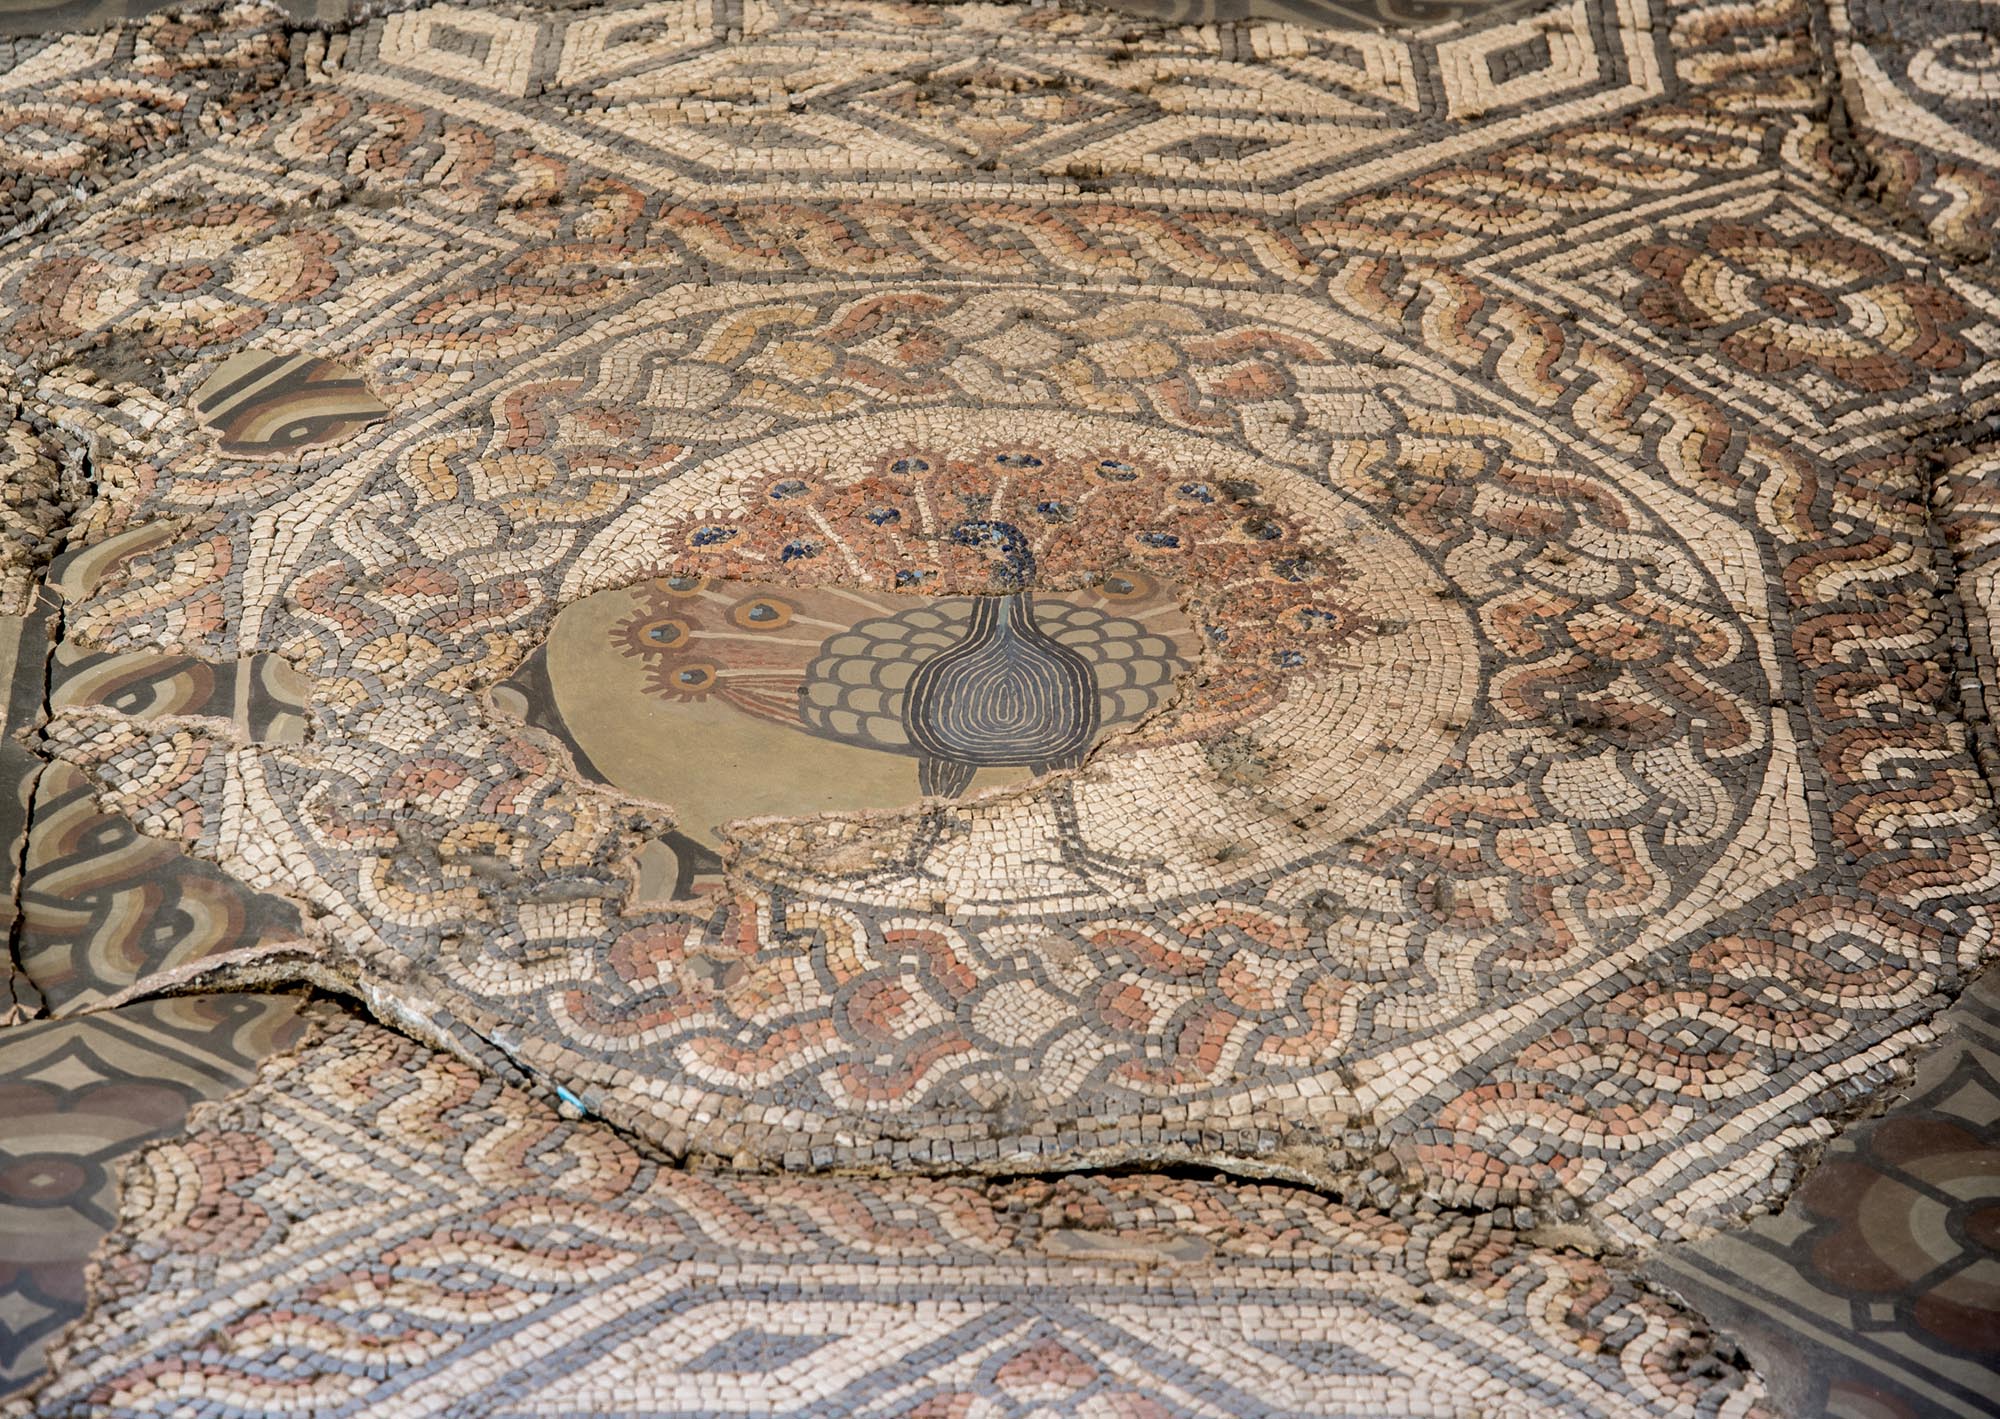 The central panel of the 2nd-century Peacock Mosaic Pavement discovered in 1898 at St Nicholas Street, now part of St Nicholas Circle. It came from a Roman town house, partly excavated in 1968 -